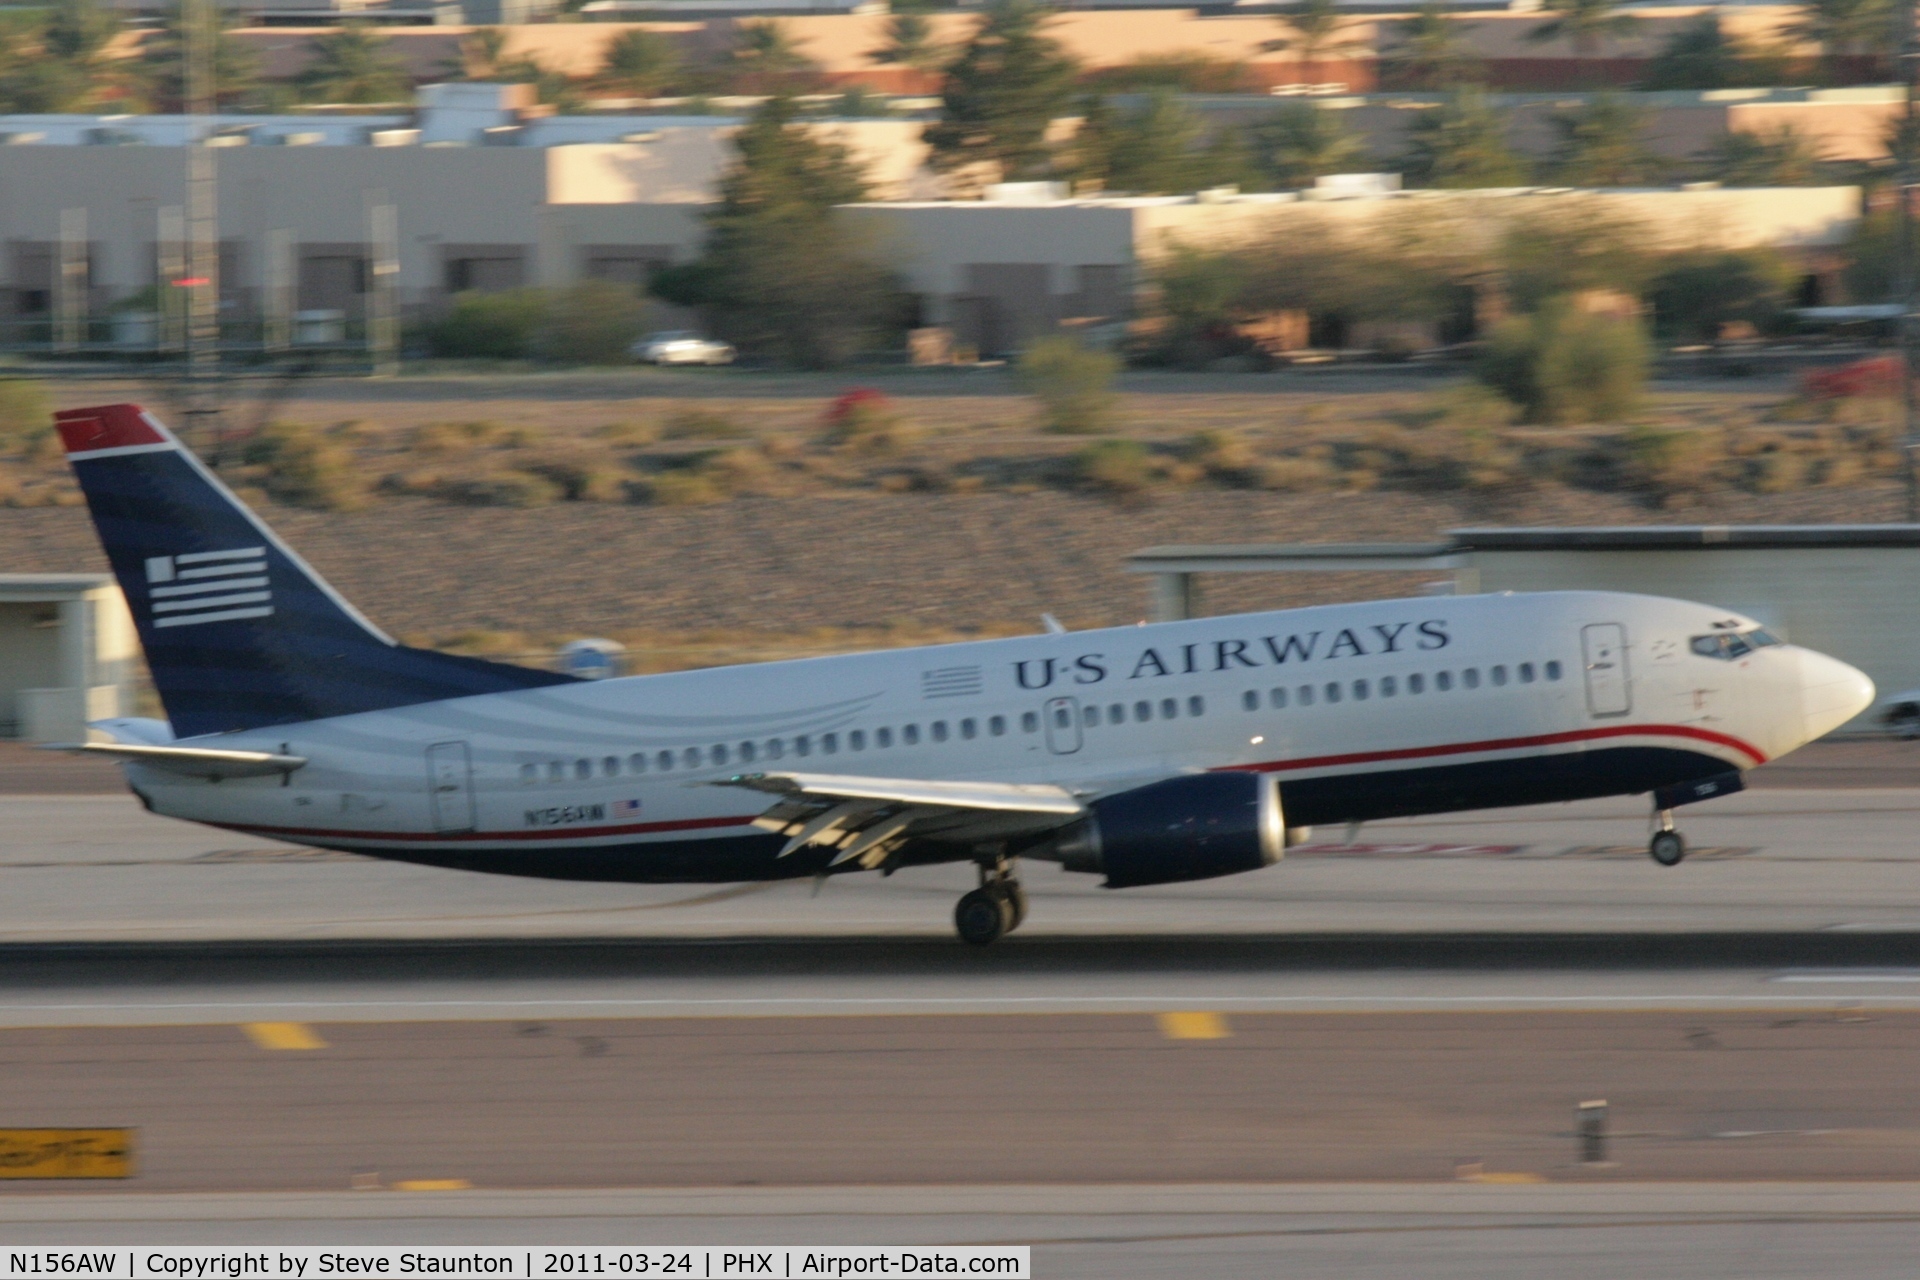 N156AW, 1987 Boeing 737-3G7 C/N 23778, Taken at Phoenix Sky Harbor Airport, in March 2011 whilst on an Aeroprint Aviation tour